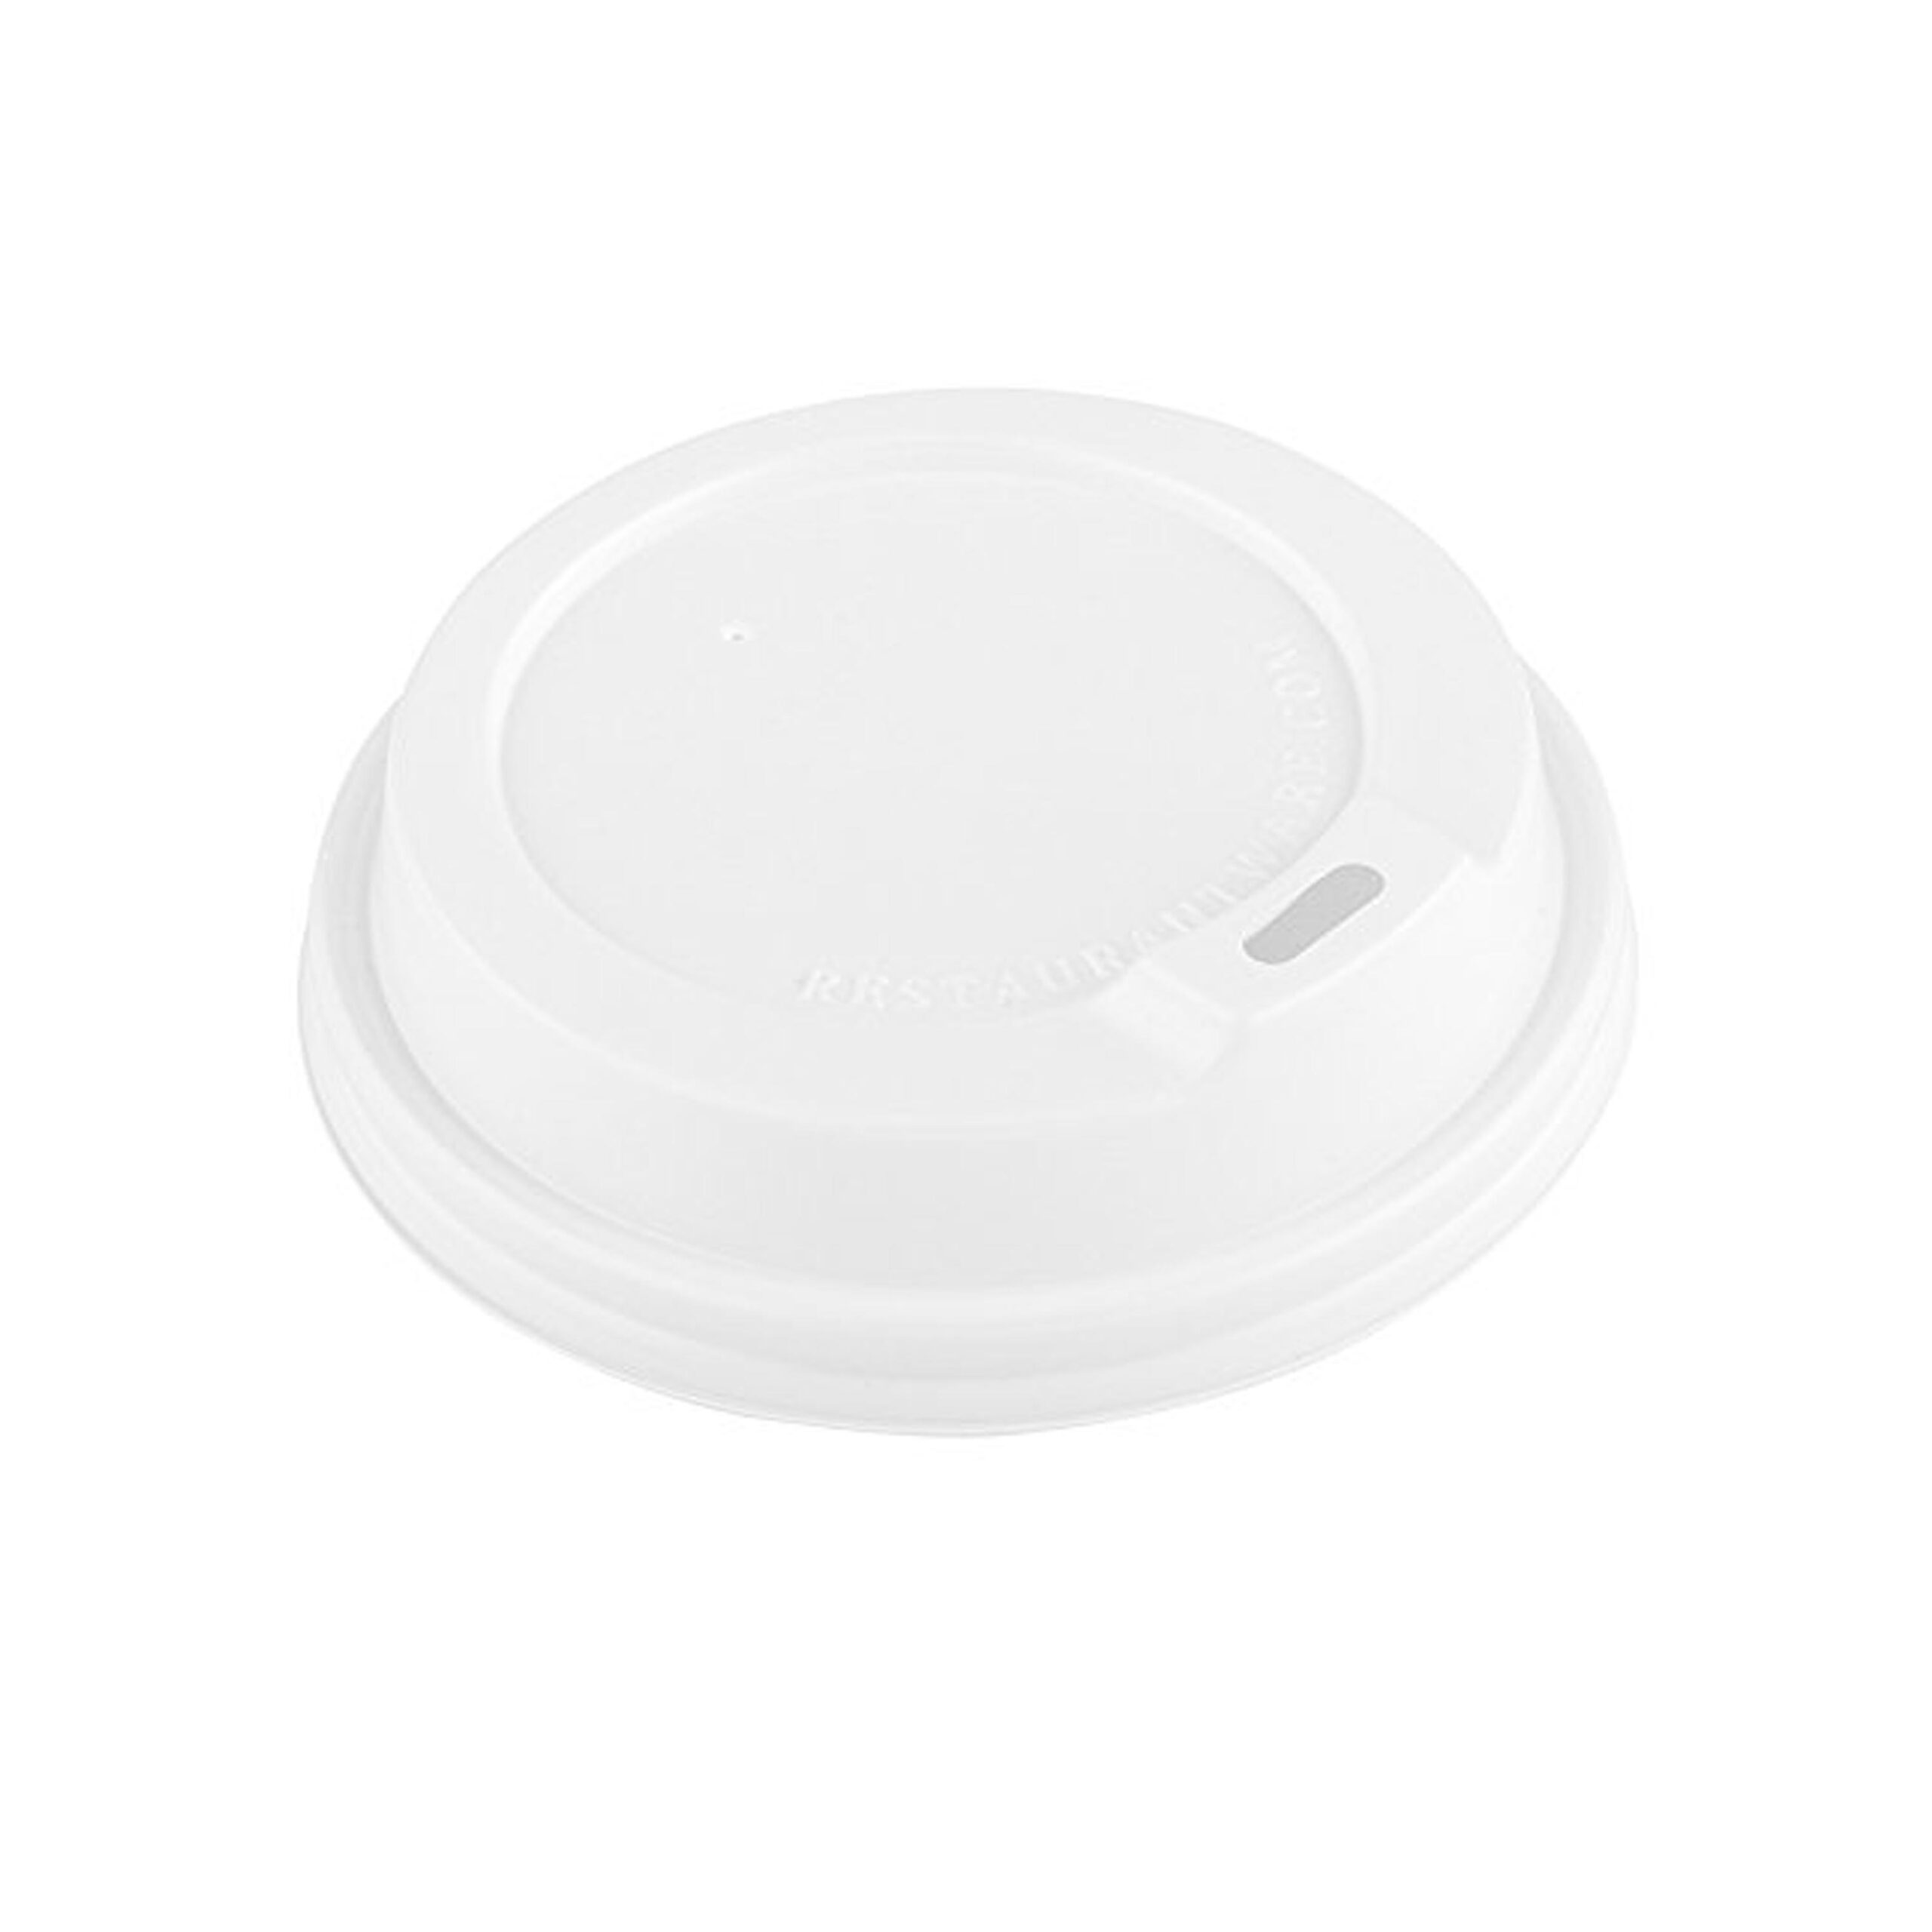 SIP LIDS WHITE
FOR 350ml COFFEE
CUPS (1x500)